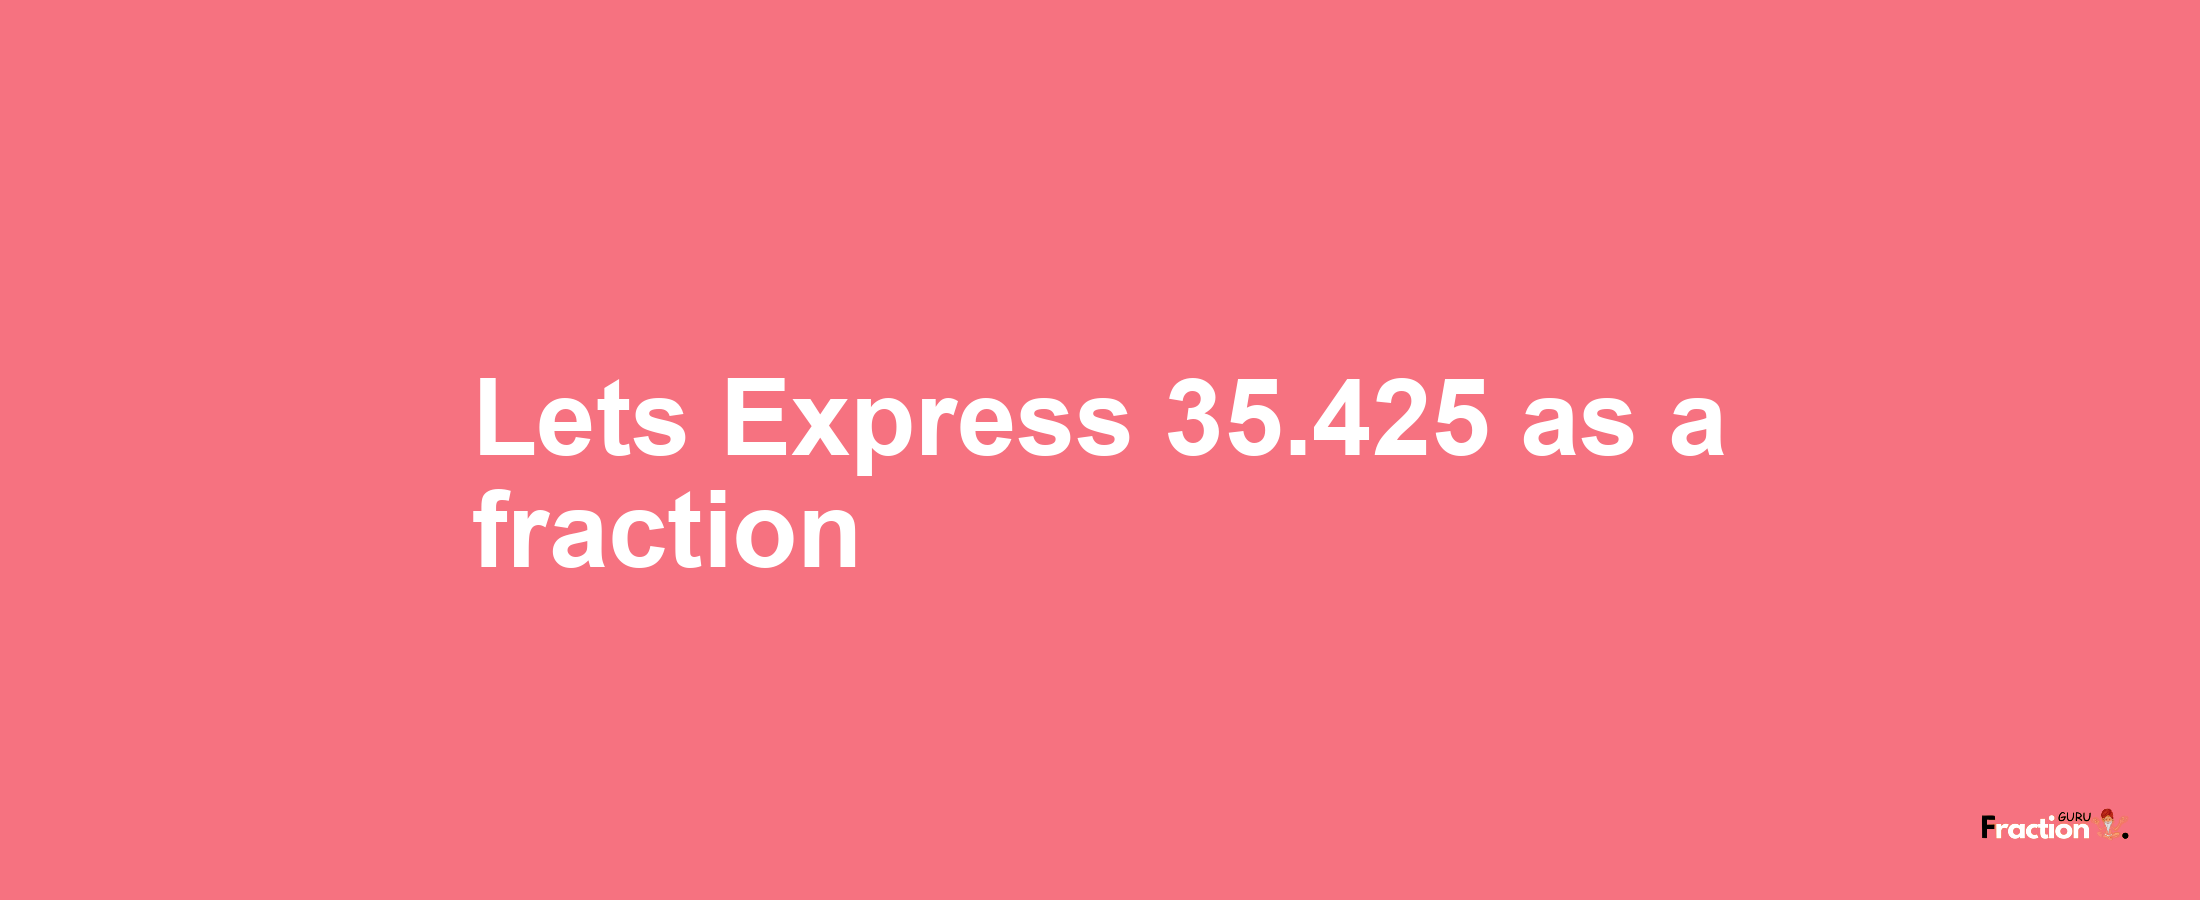 Lets Express 35.425 as afraction